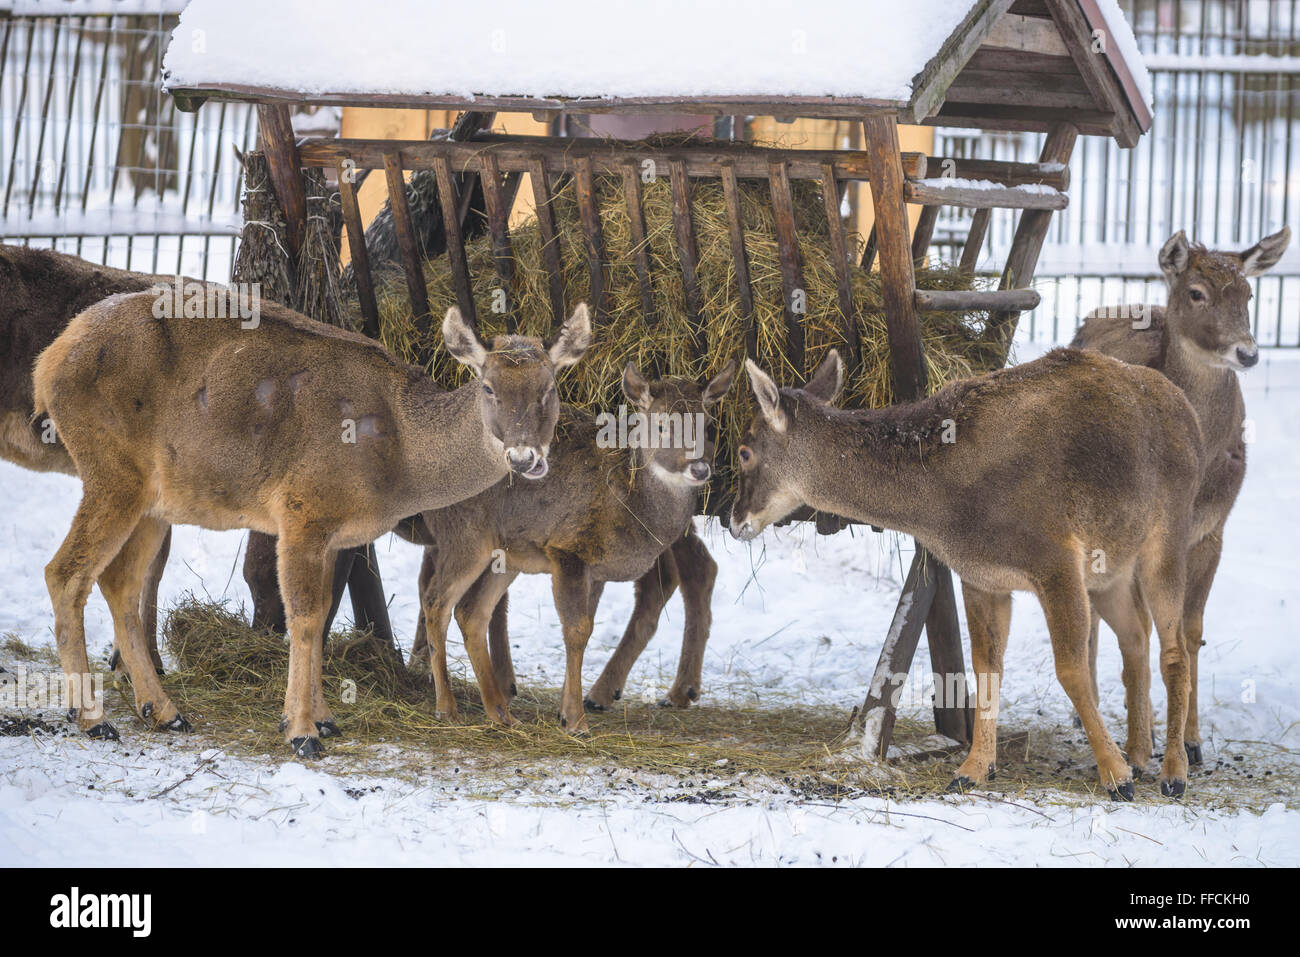 North grey deers are feeding under shed Stock Photo